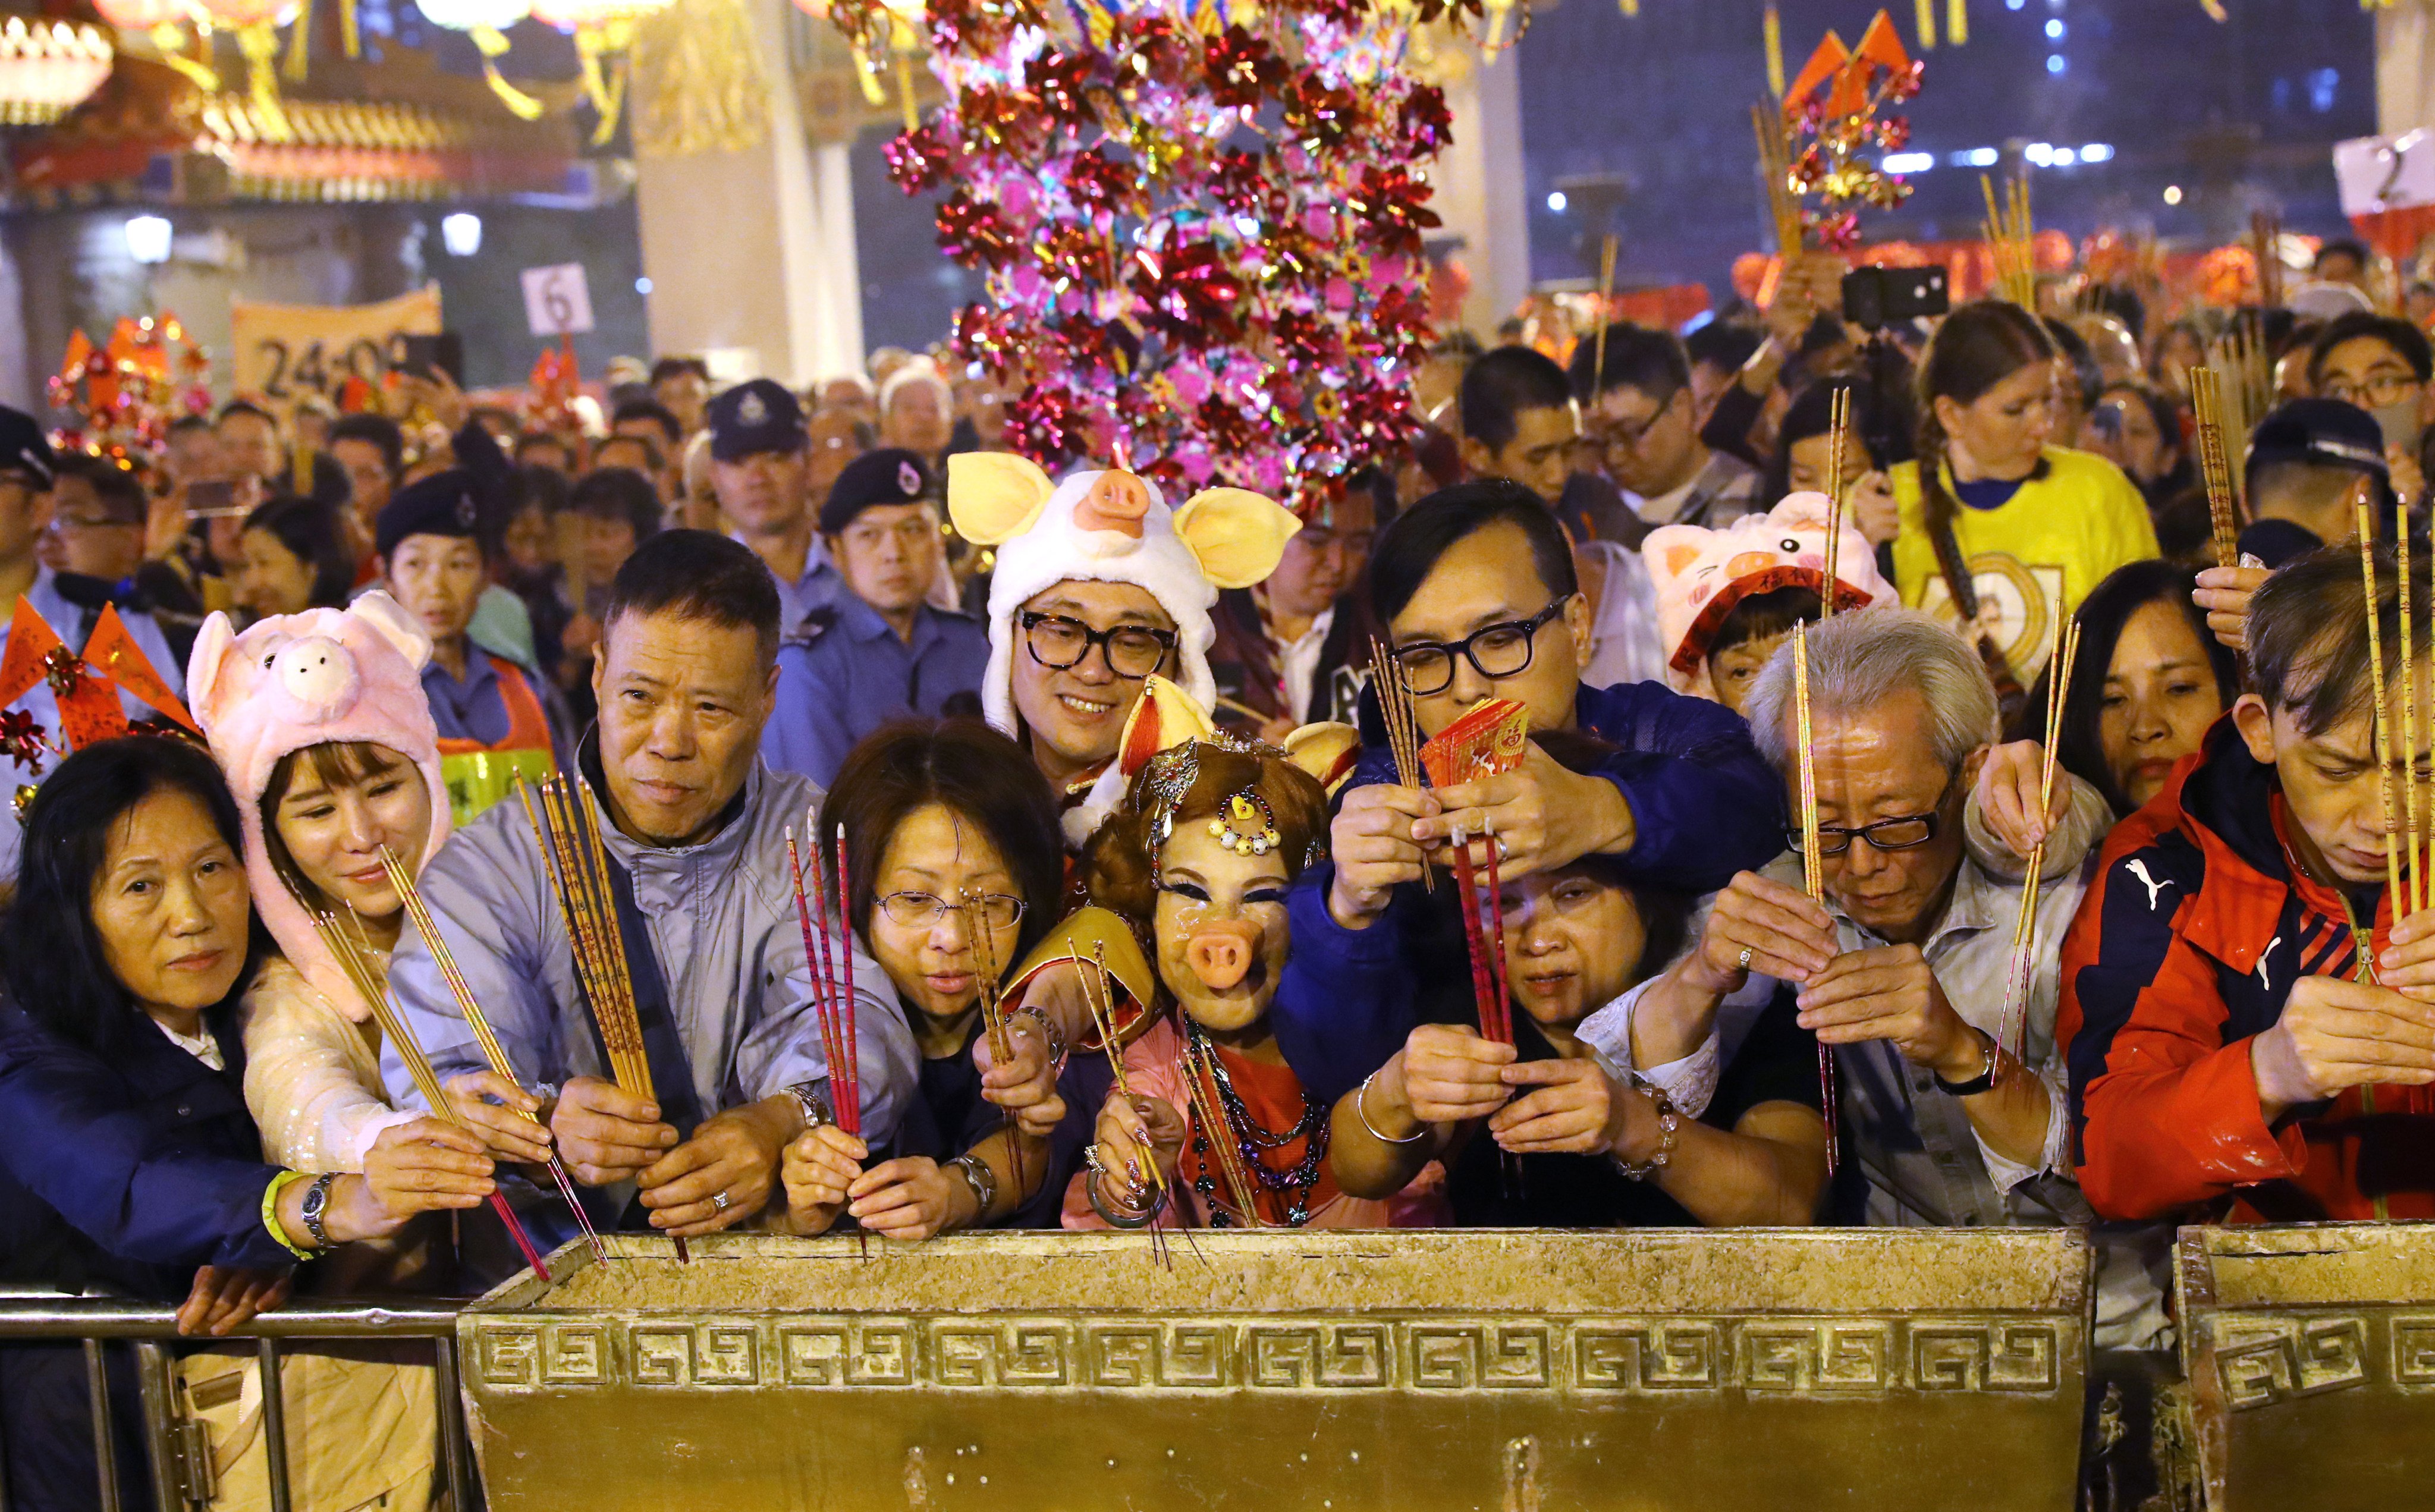 Worshippers, including a woman dressed in a pig costume, offer incense at Wong Tai Sin Temple in Hong Kong on Lunar New Year’s Eve in 2019. Festivities for Chinese New Year run to 16 days, with different traditions attached to each day. Photo: Edmond So